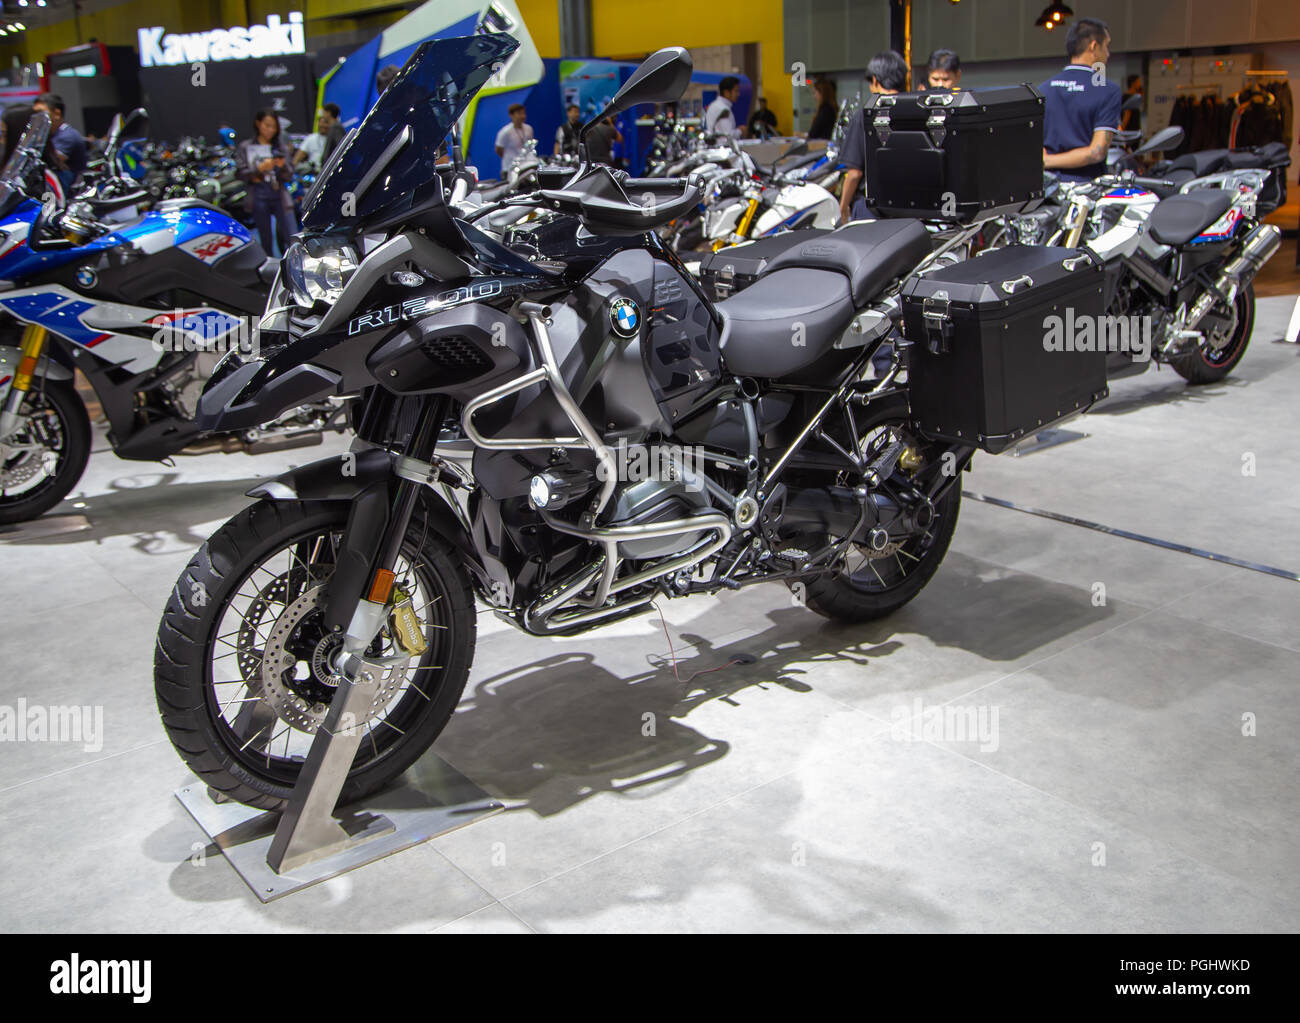 bmw 1200 gs for sale near me